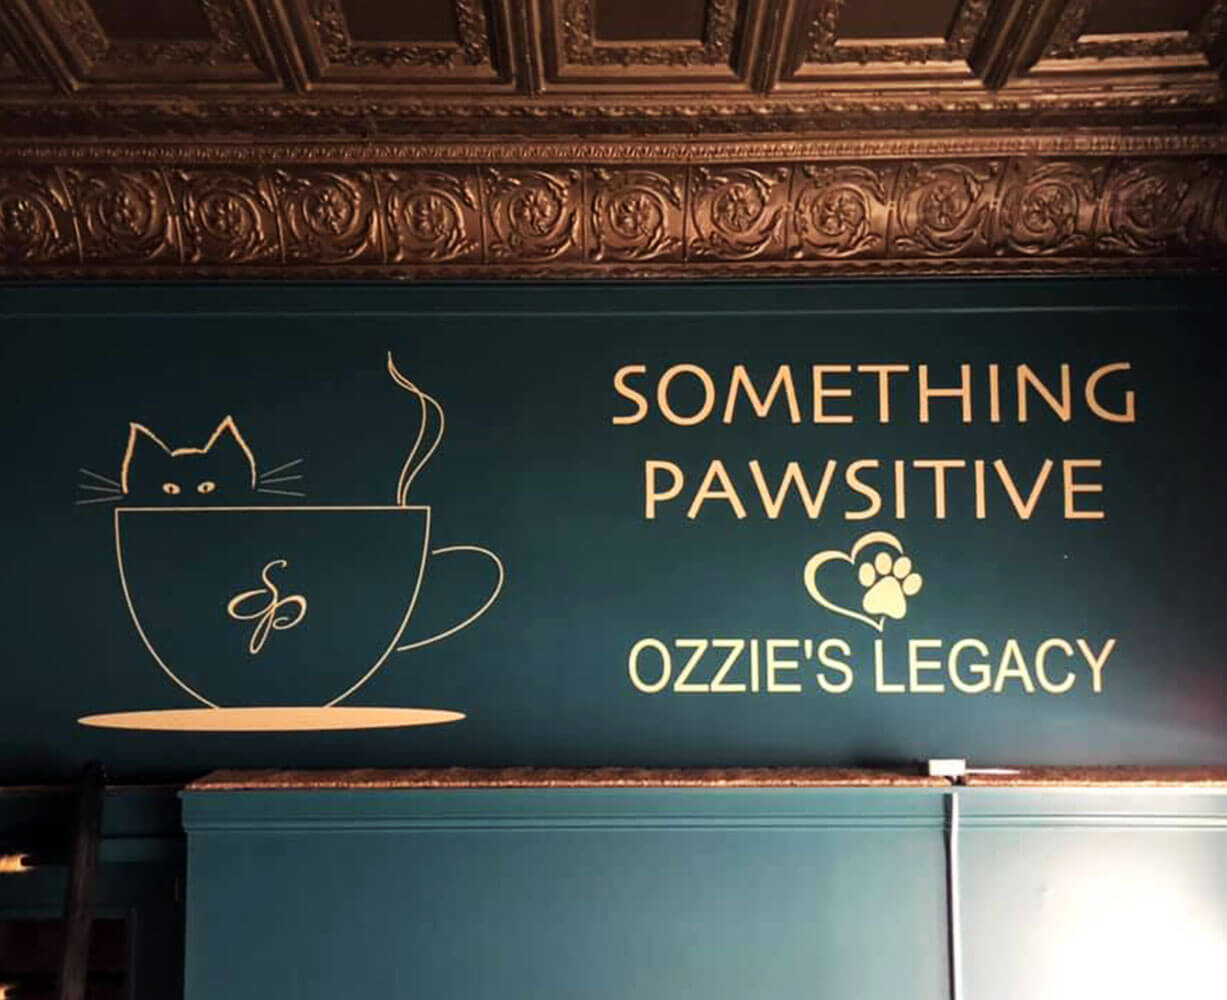 Something Pawsitive & Ozzie's Legacy